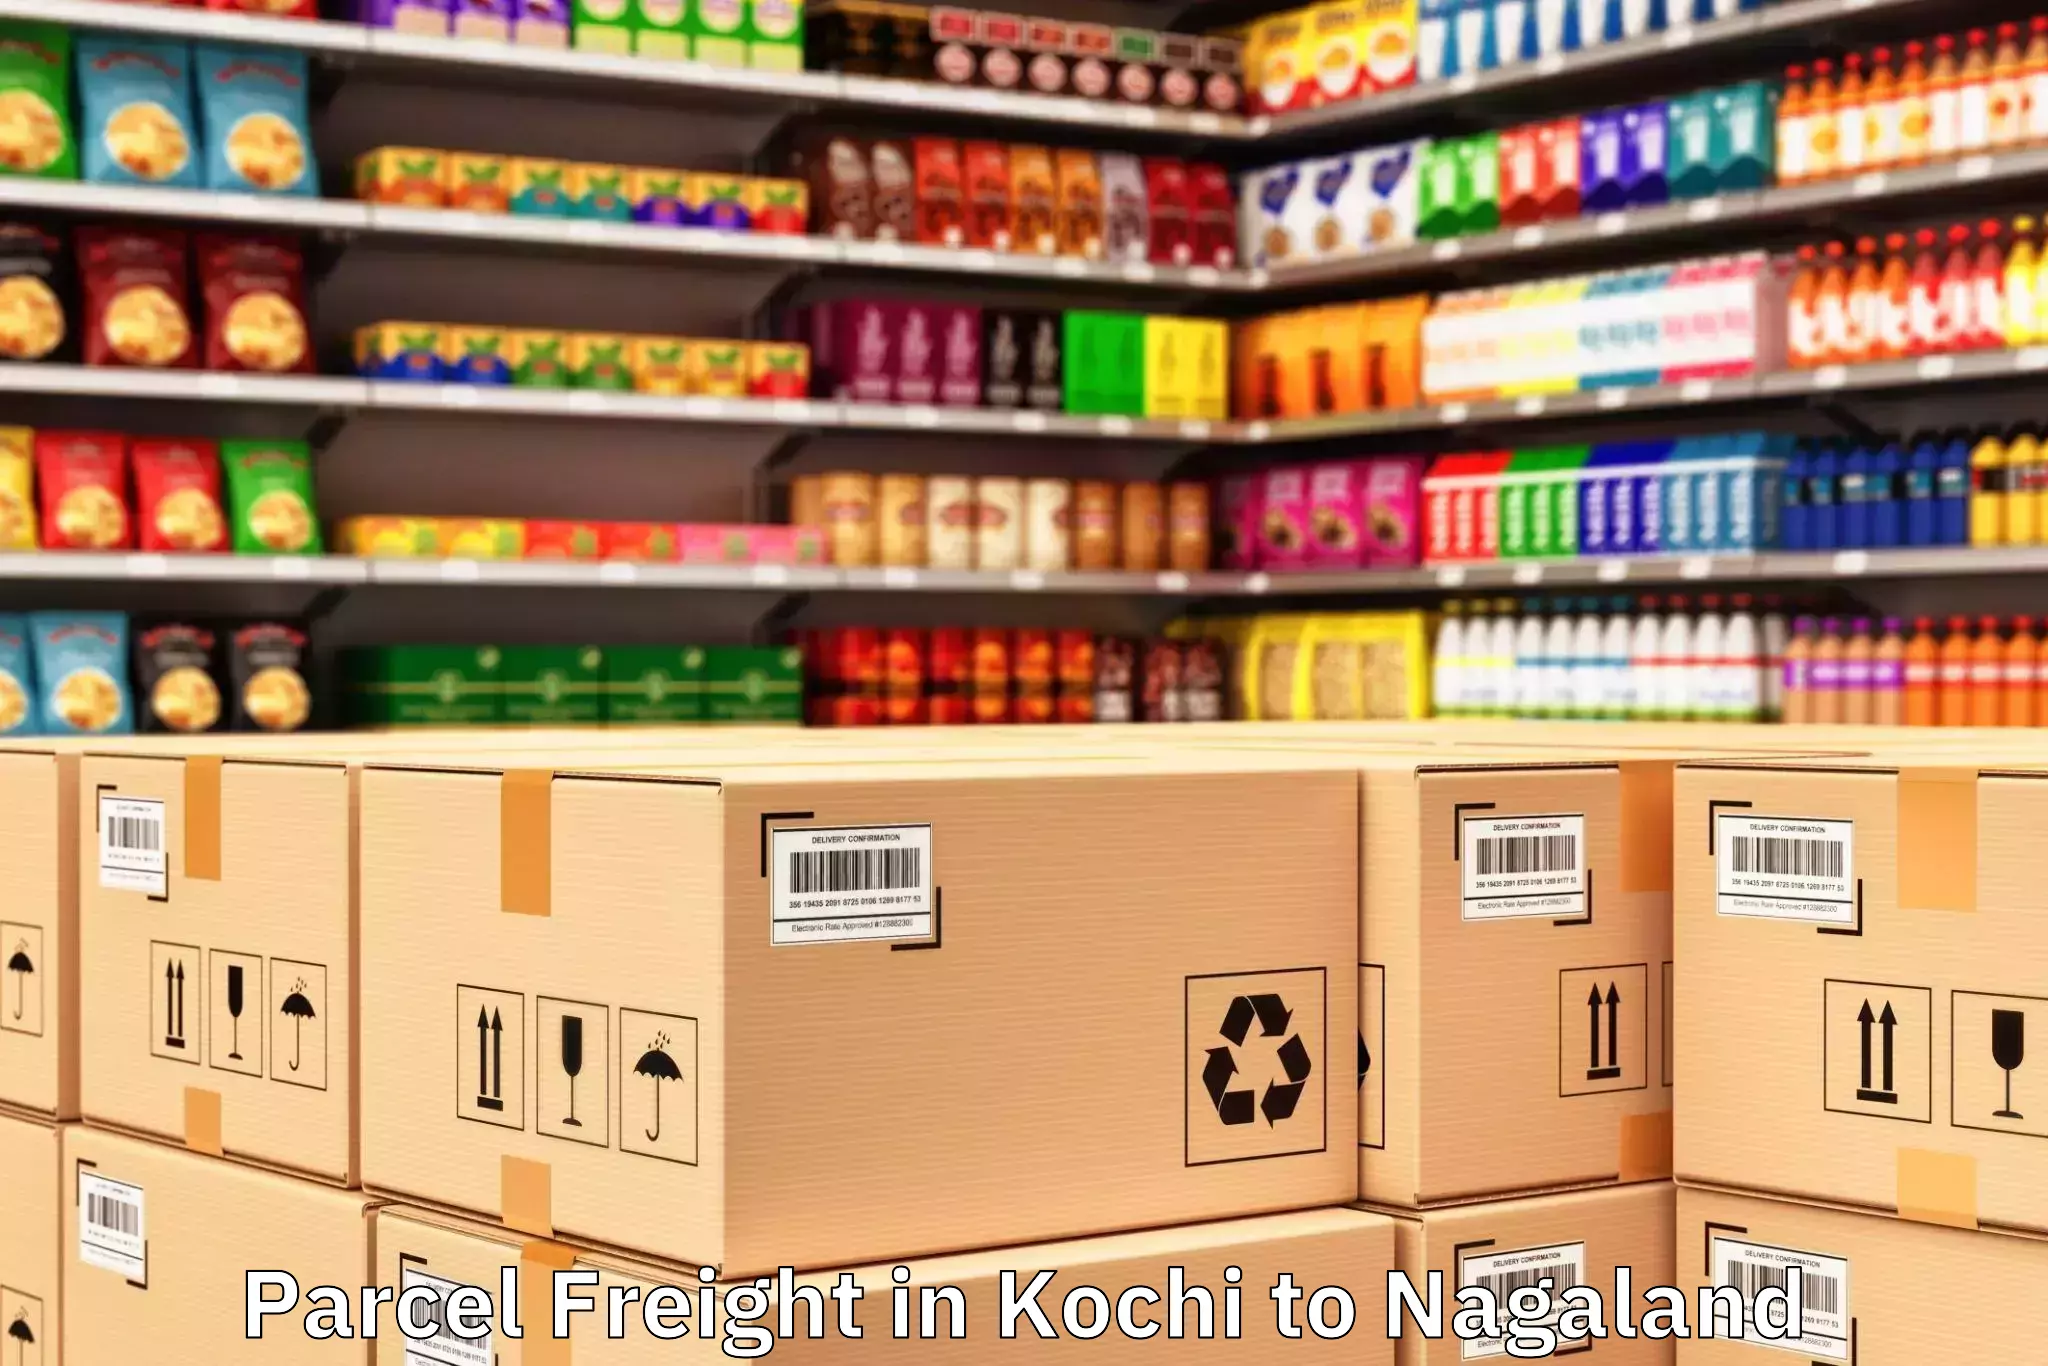 Reliable Kochi to Nagaland Parcel Freight